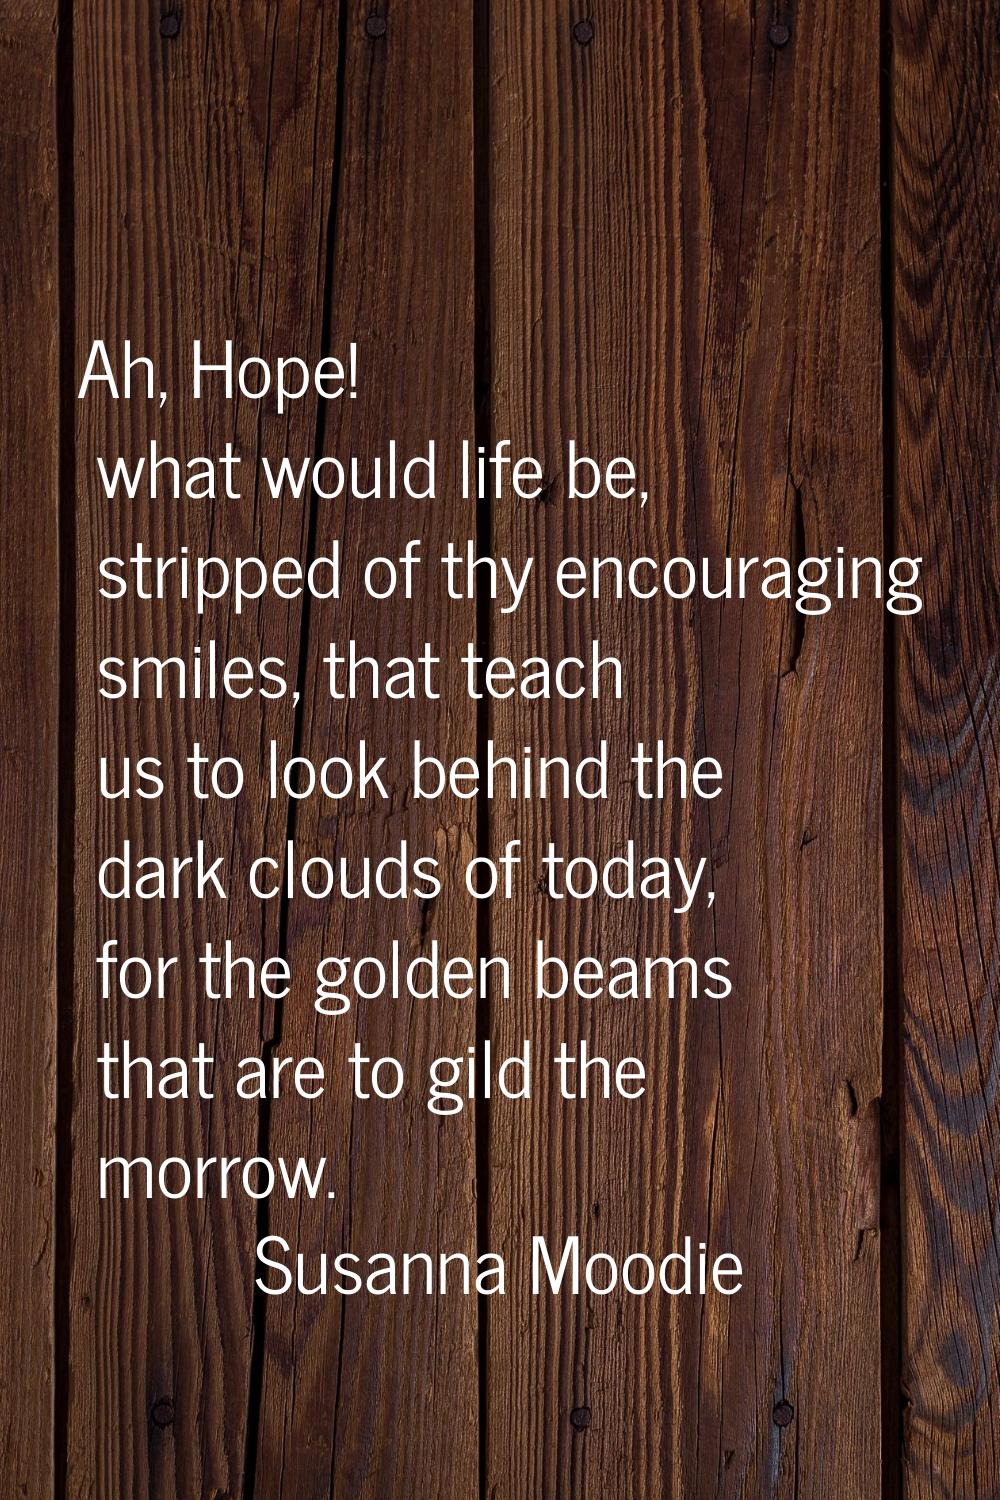 Ah, Hope! what would life be, stripped of thy encouraging smiles, that teach us to look behind the 